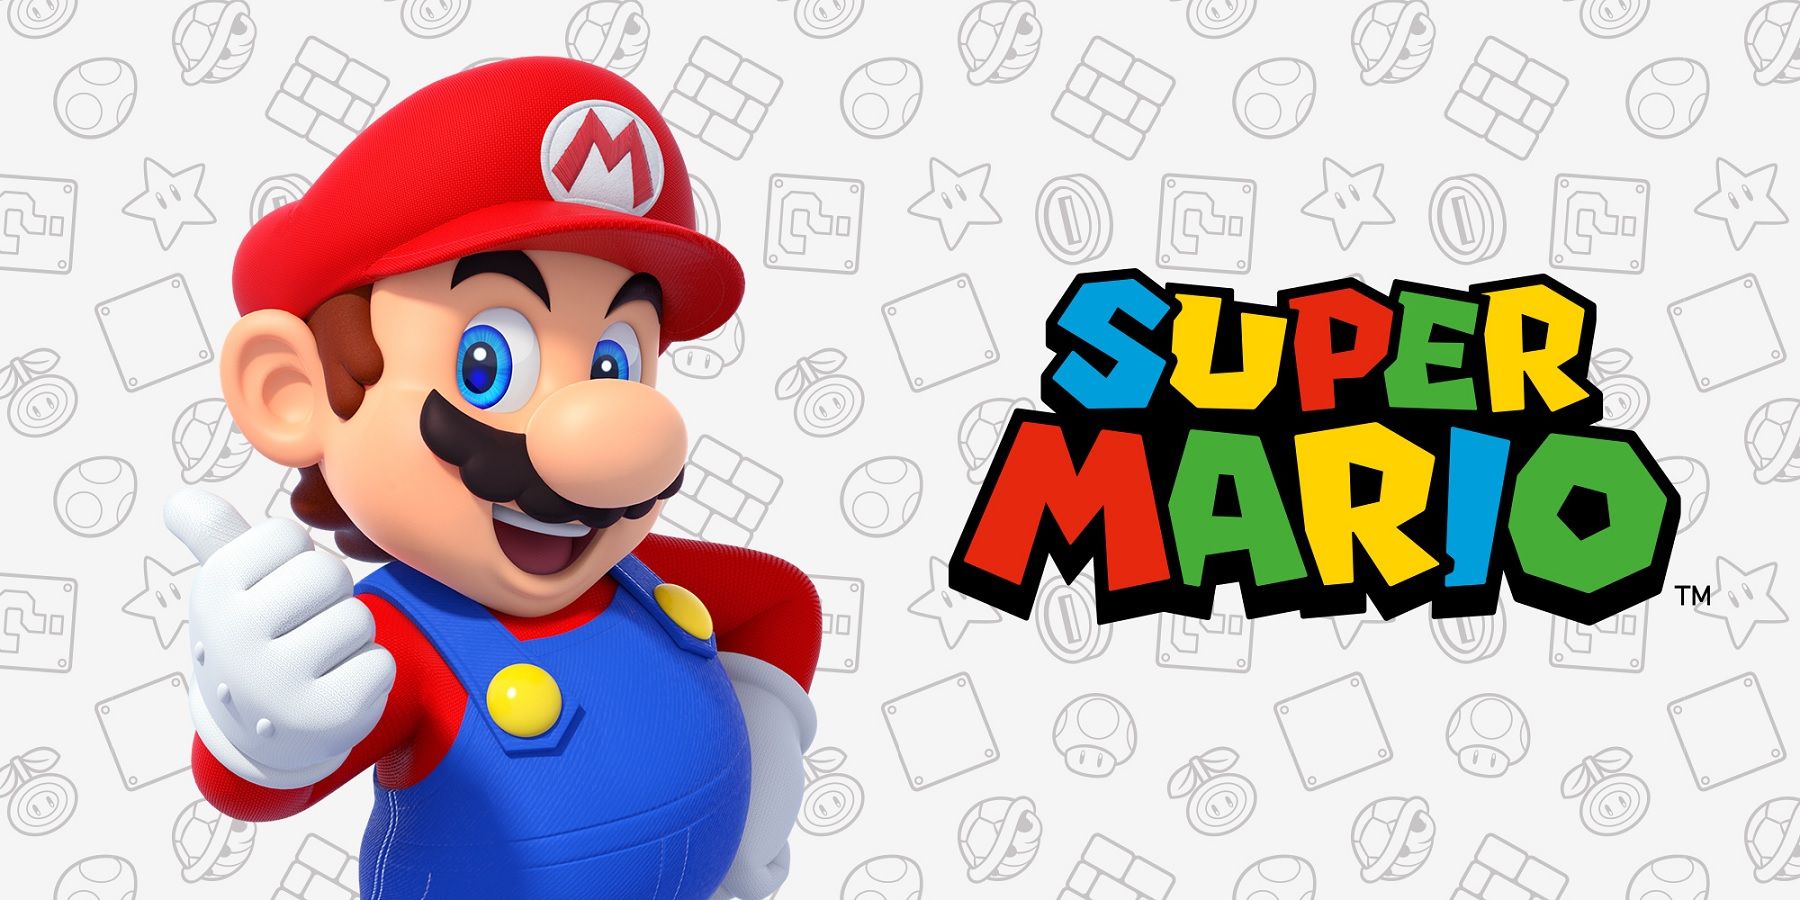 Rumor: New Super Mario Game Details Leak, Will Supposedly Have 4